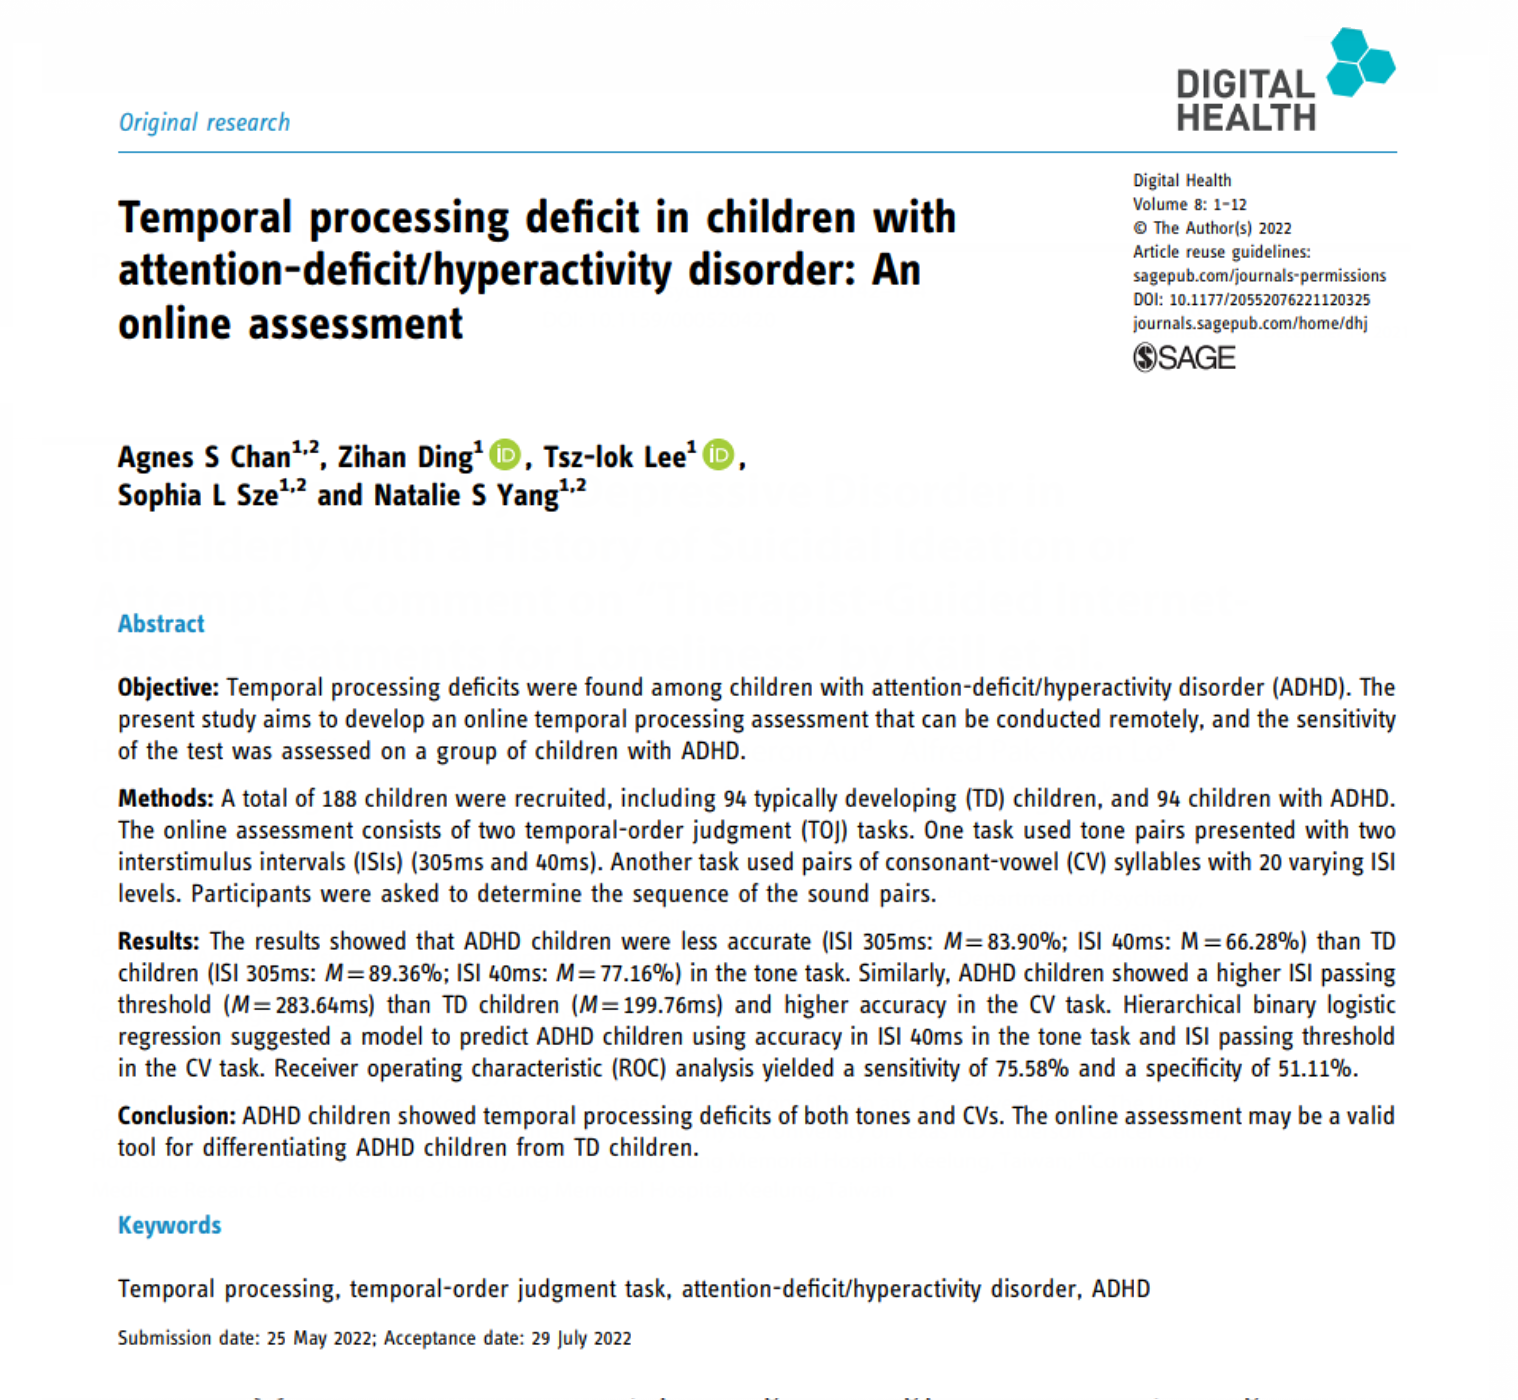 Temporal processing deficit in children with attention-deficit/hyperactivity disorder